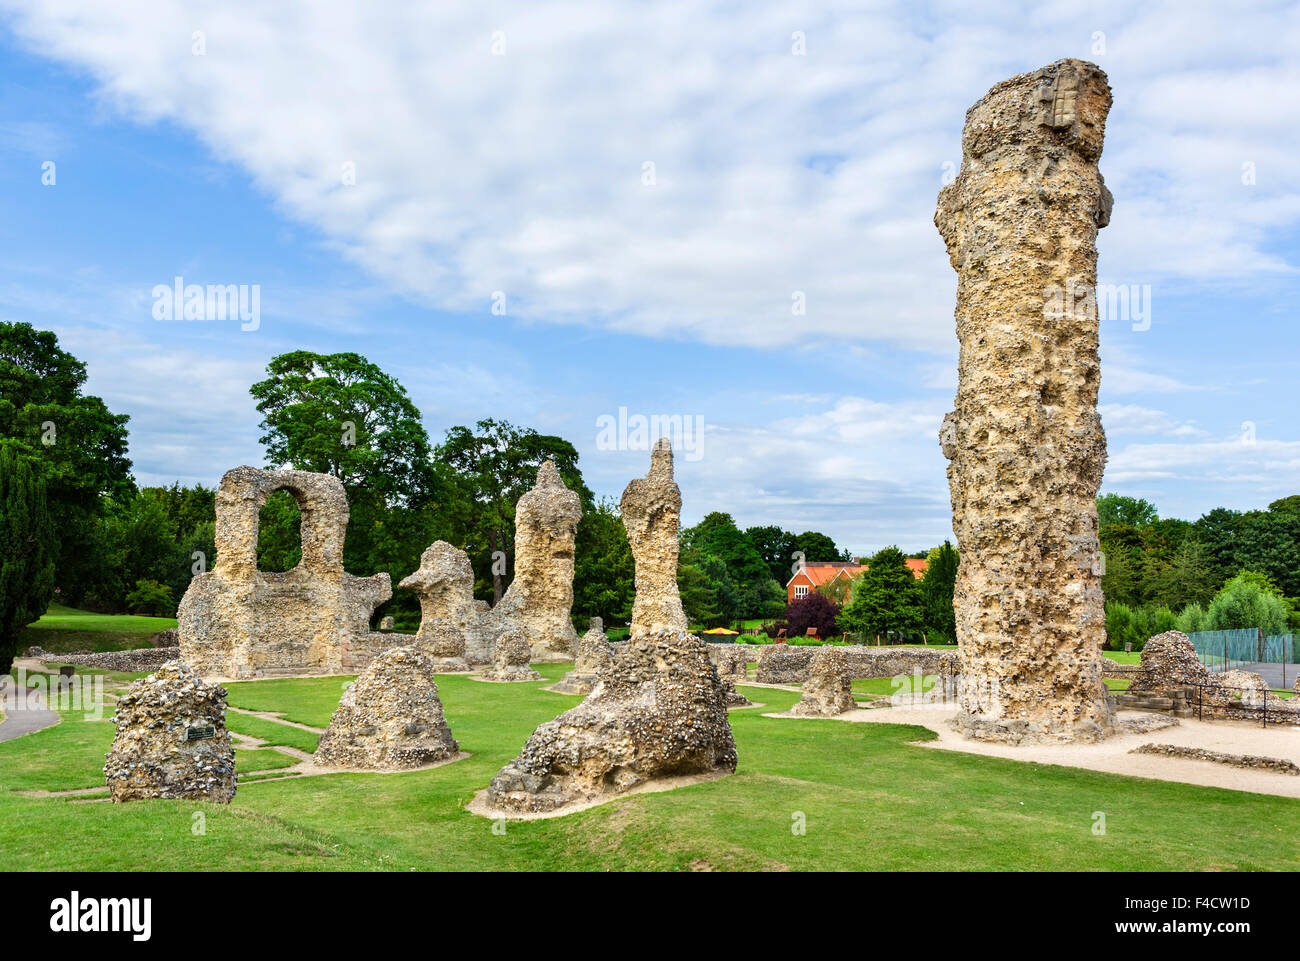 The ruins of the Abbey of St Edmund, Abbey Gardens, Bury St Edmunds, Suffolk, England, UK Stock Photo